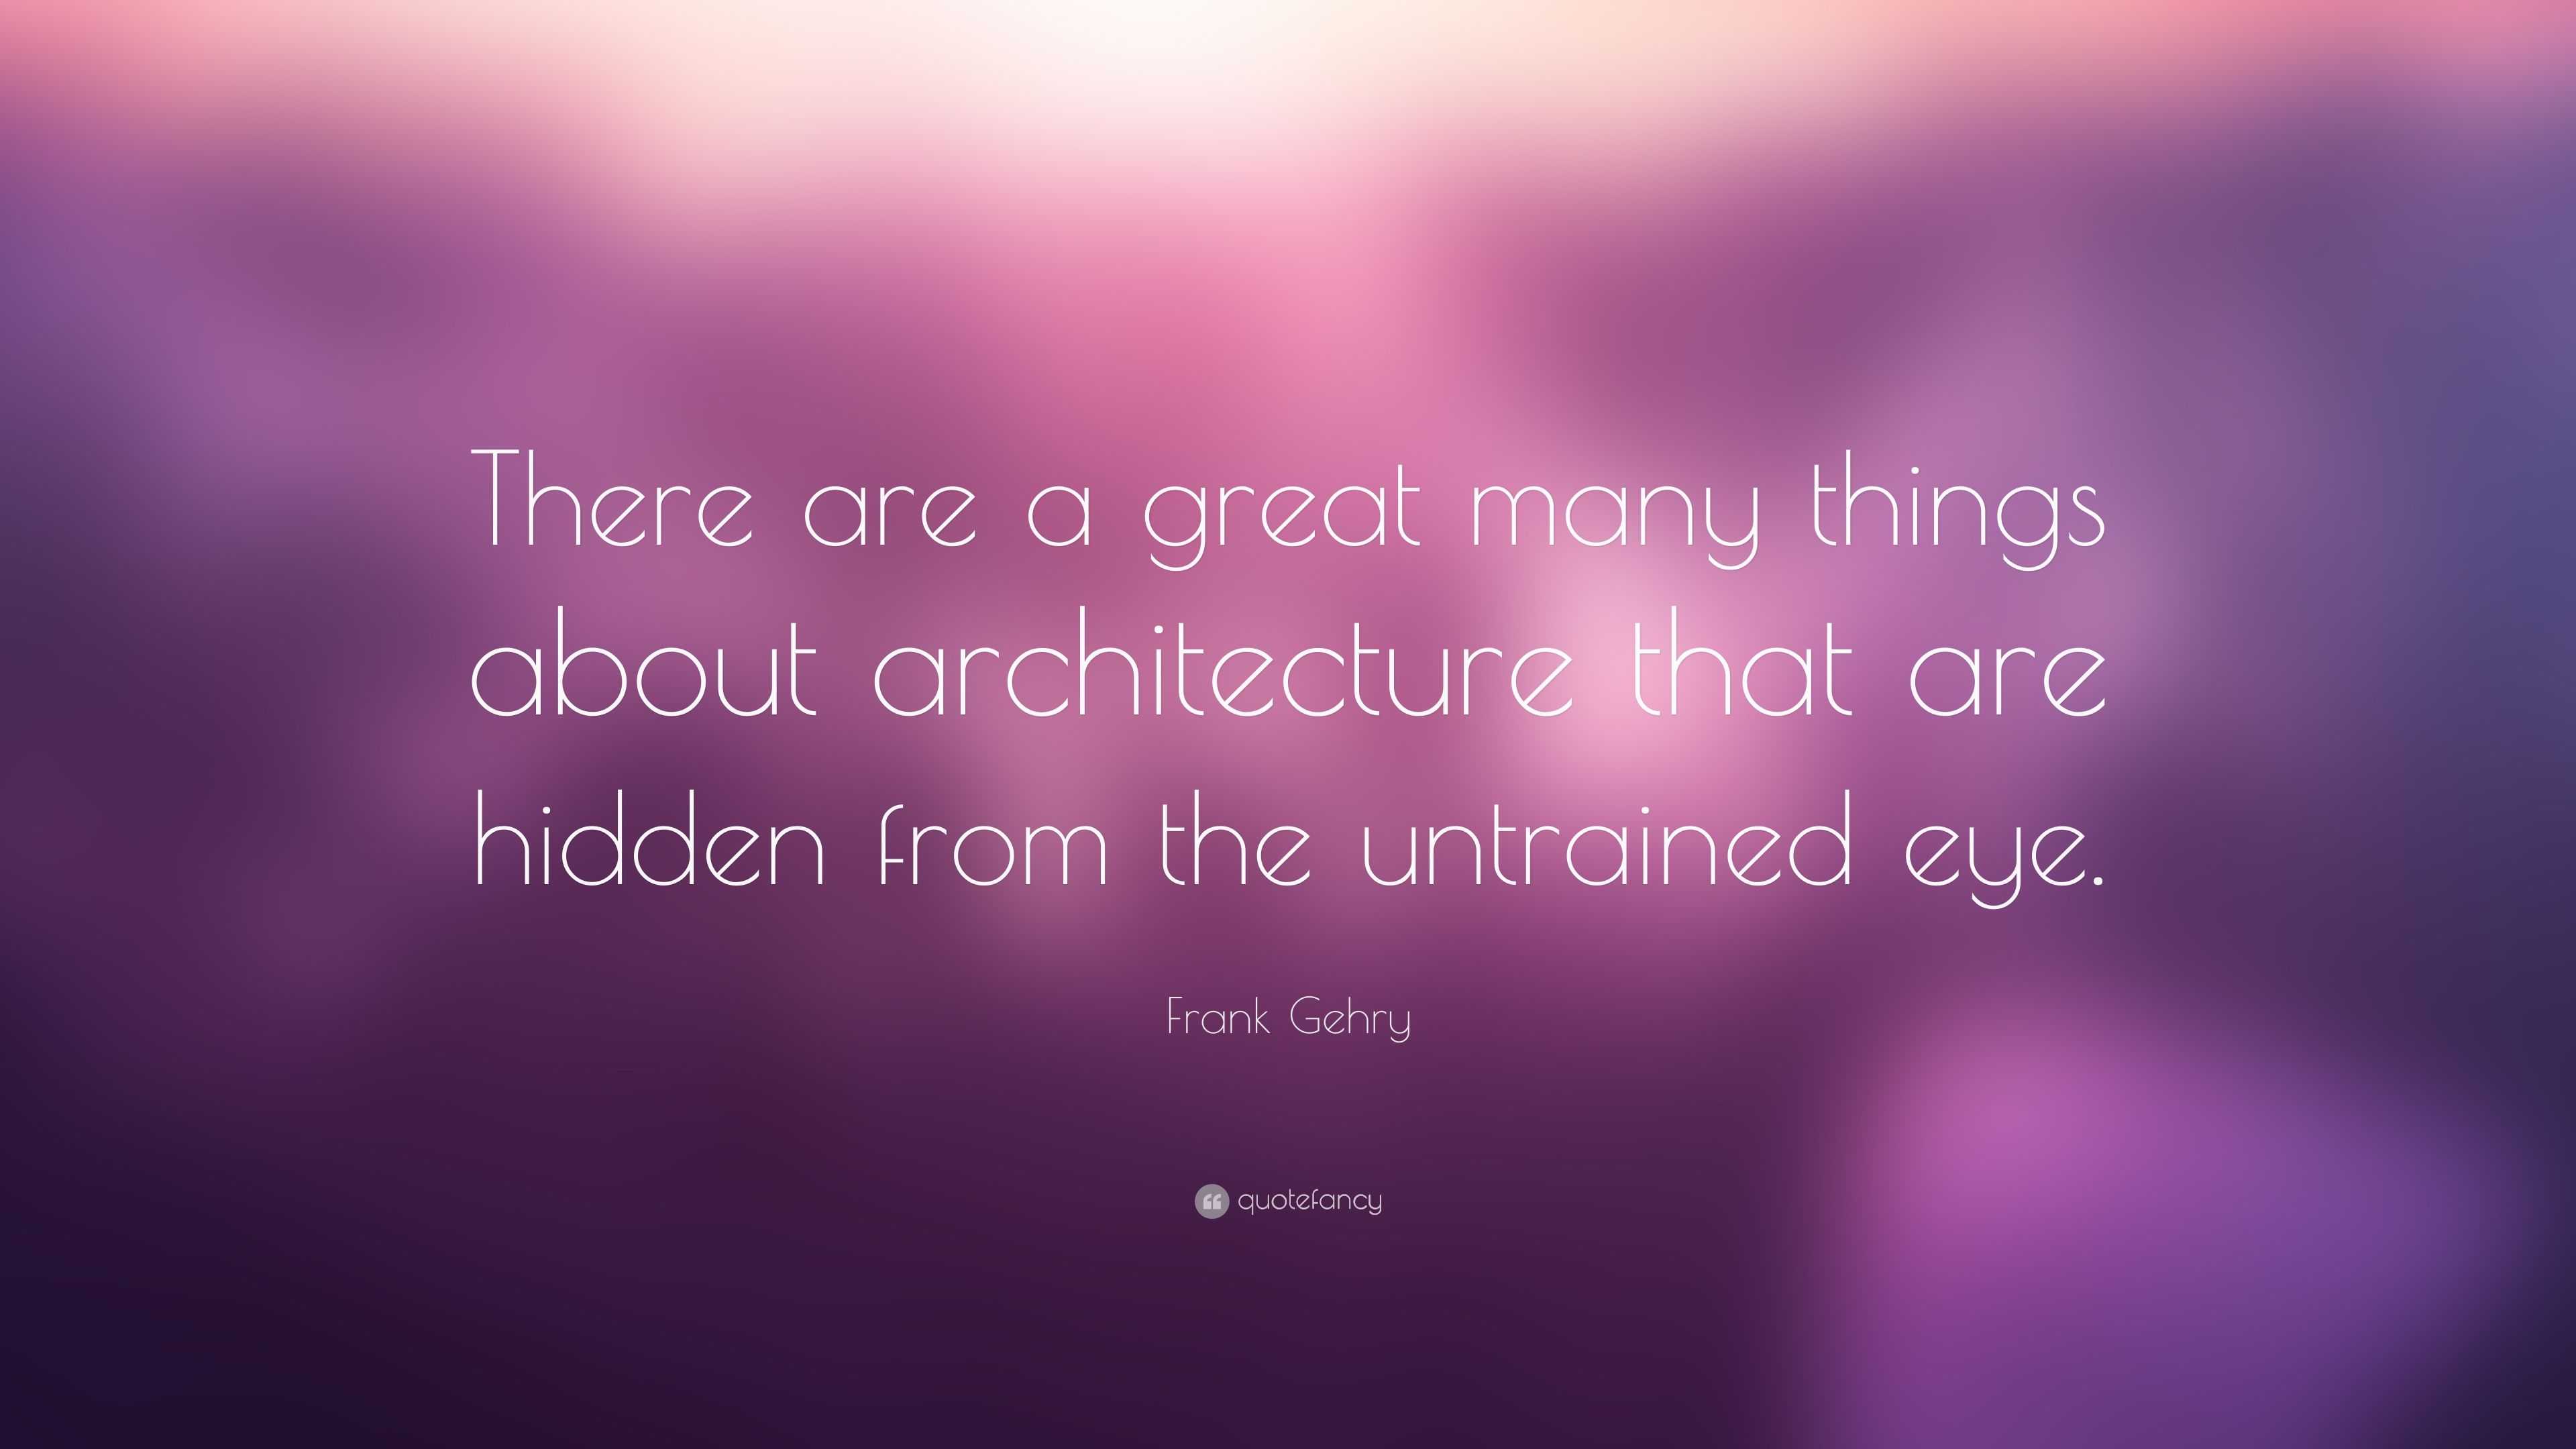 Frank Gehry Quote: “There are a great many things about architecture ...